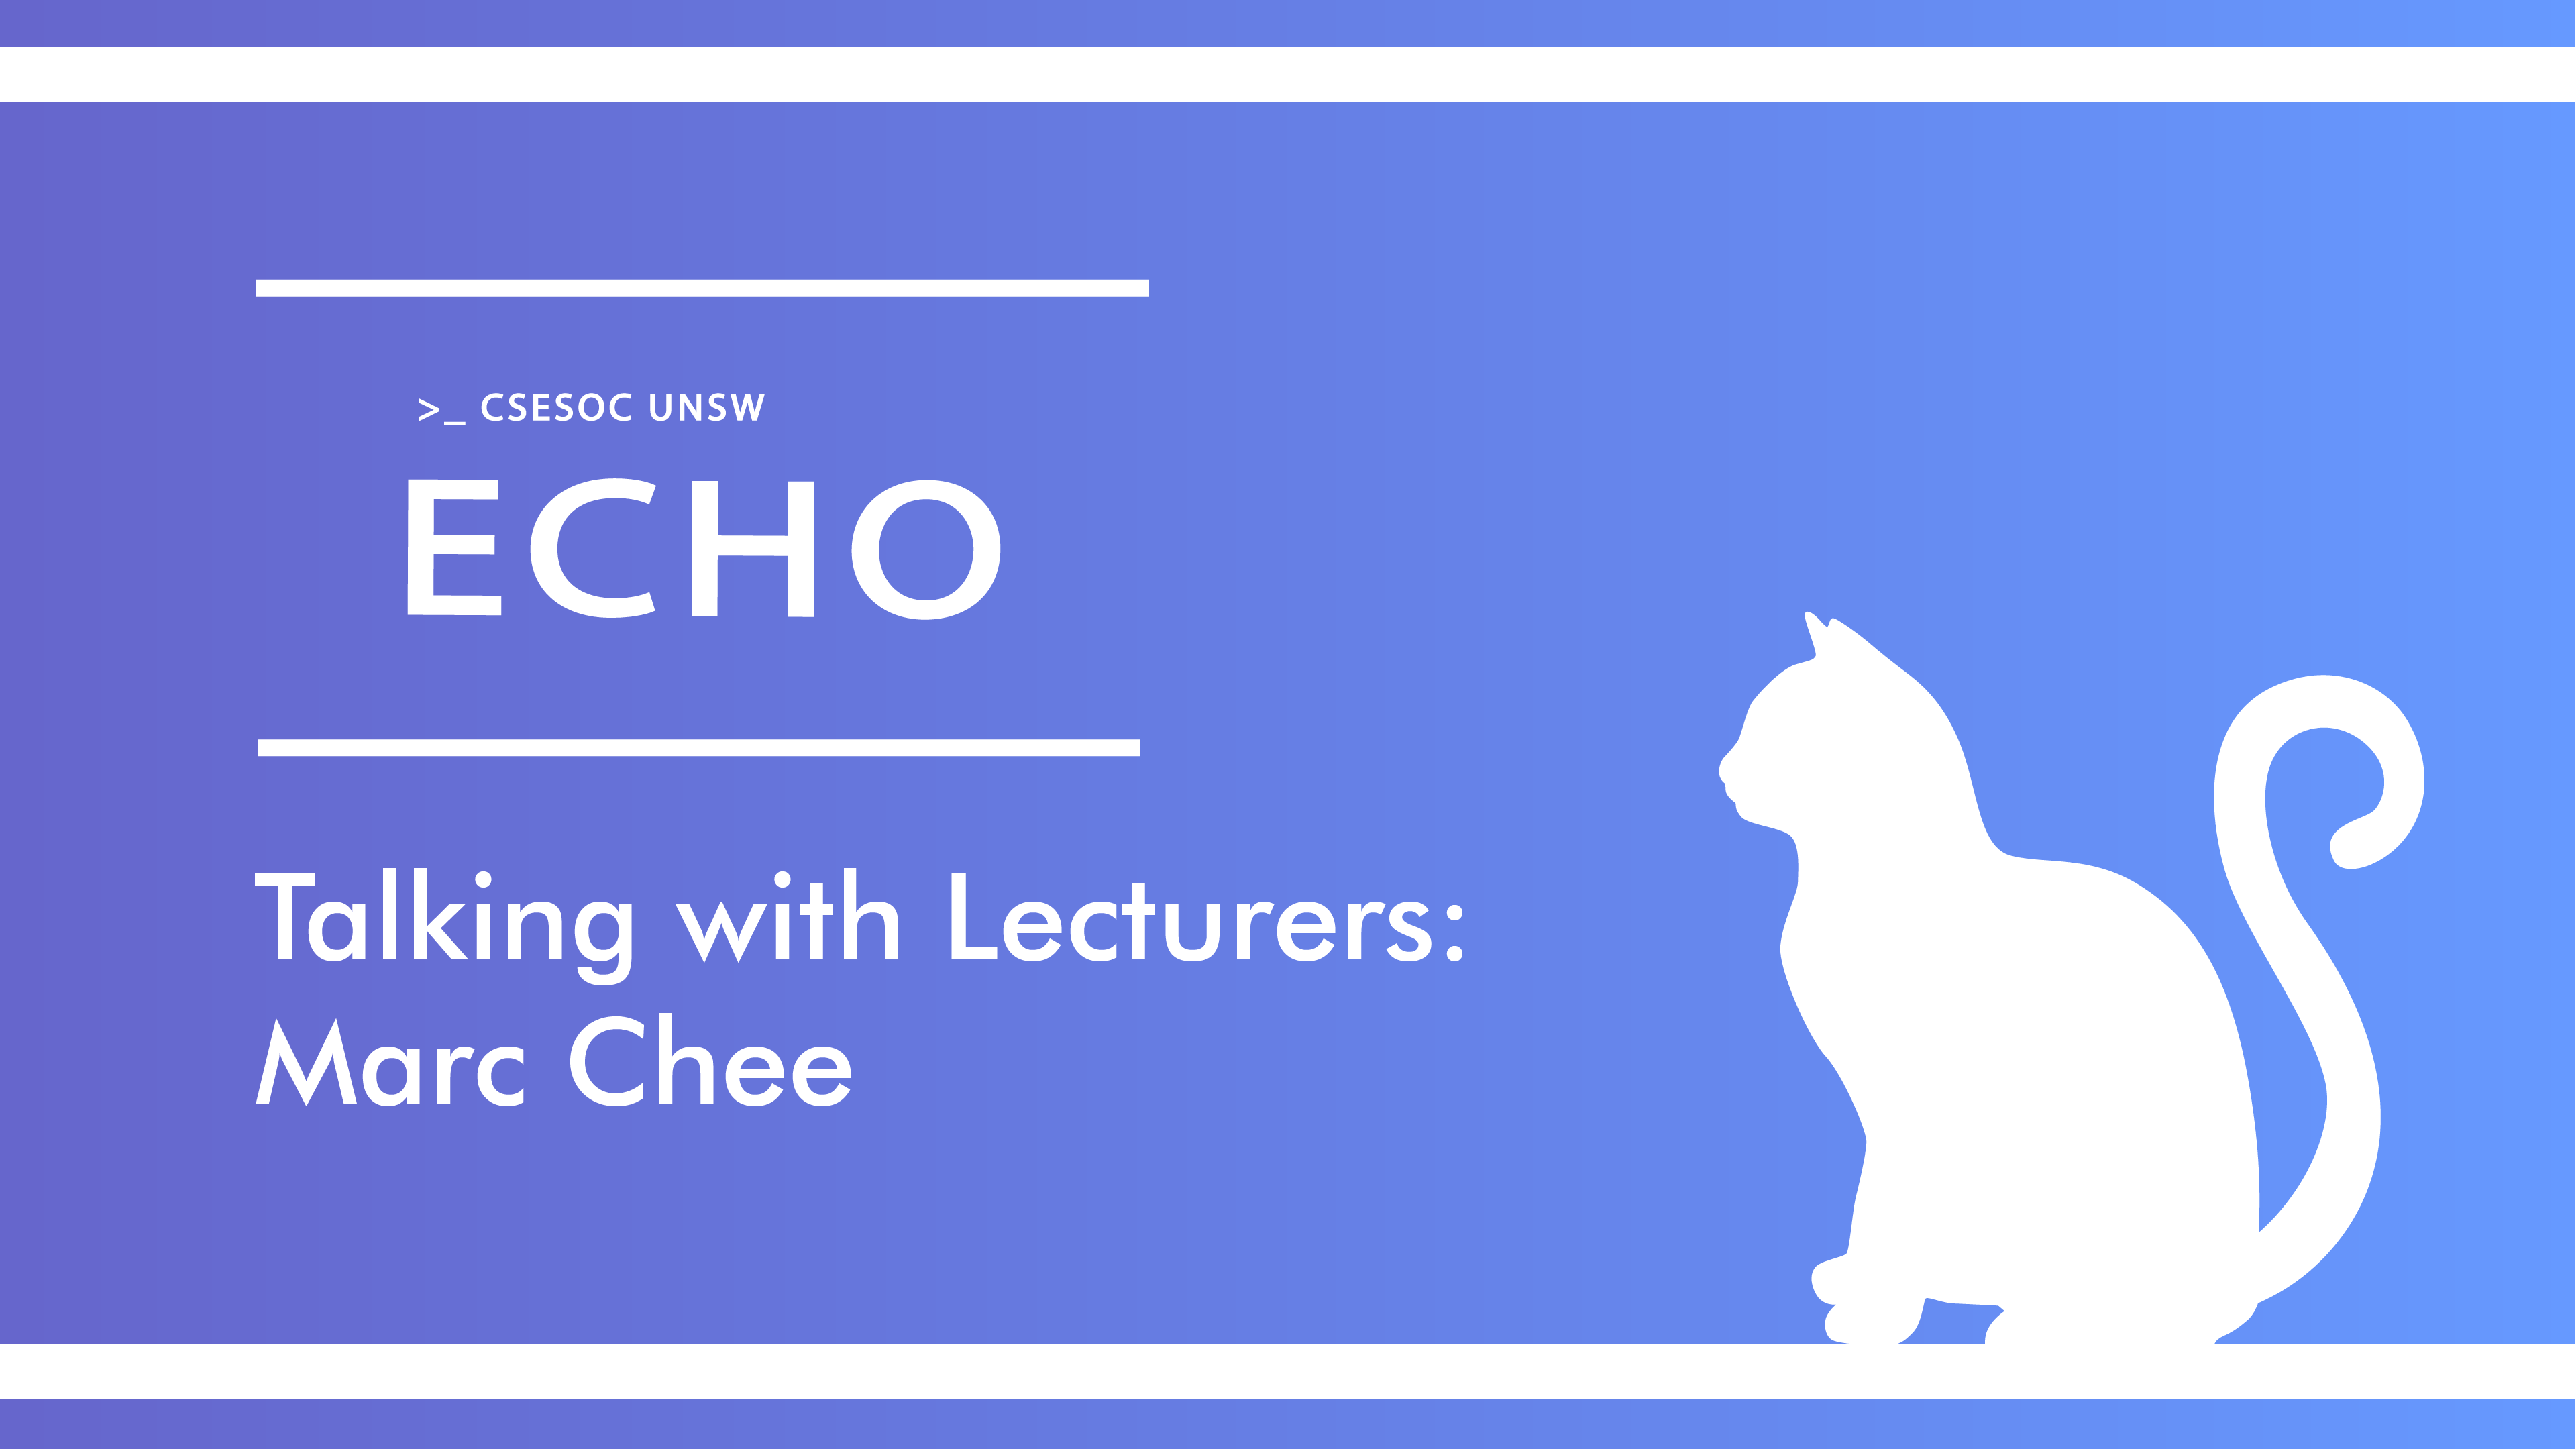 Talking with Lecturers: Marc Chee